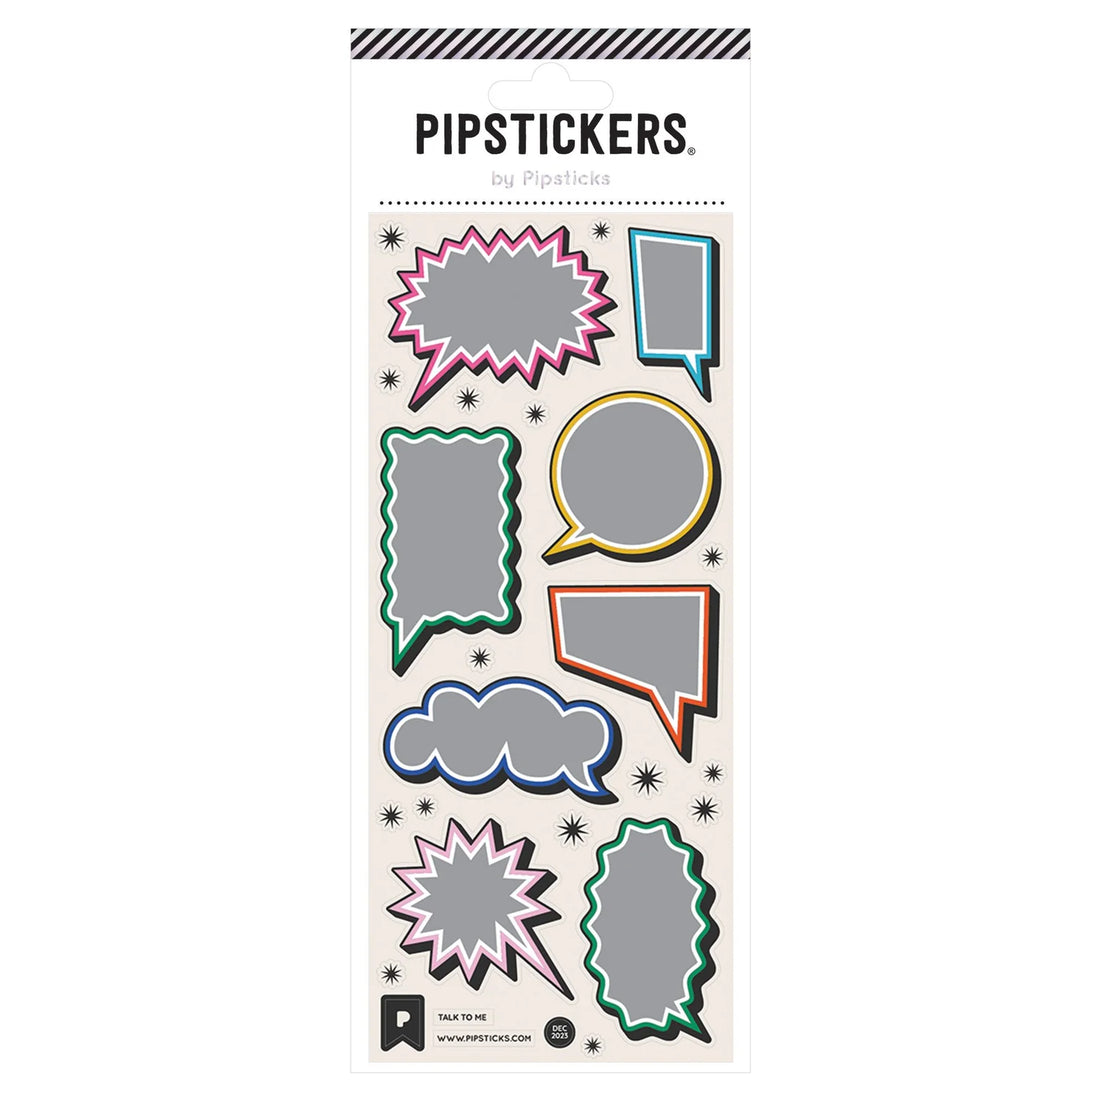 Pipstickers $5.99 Preview #2